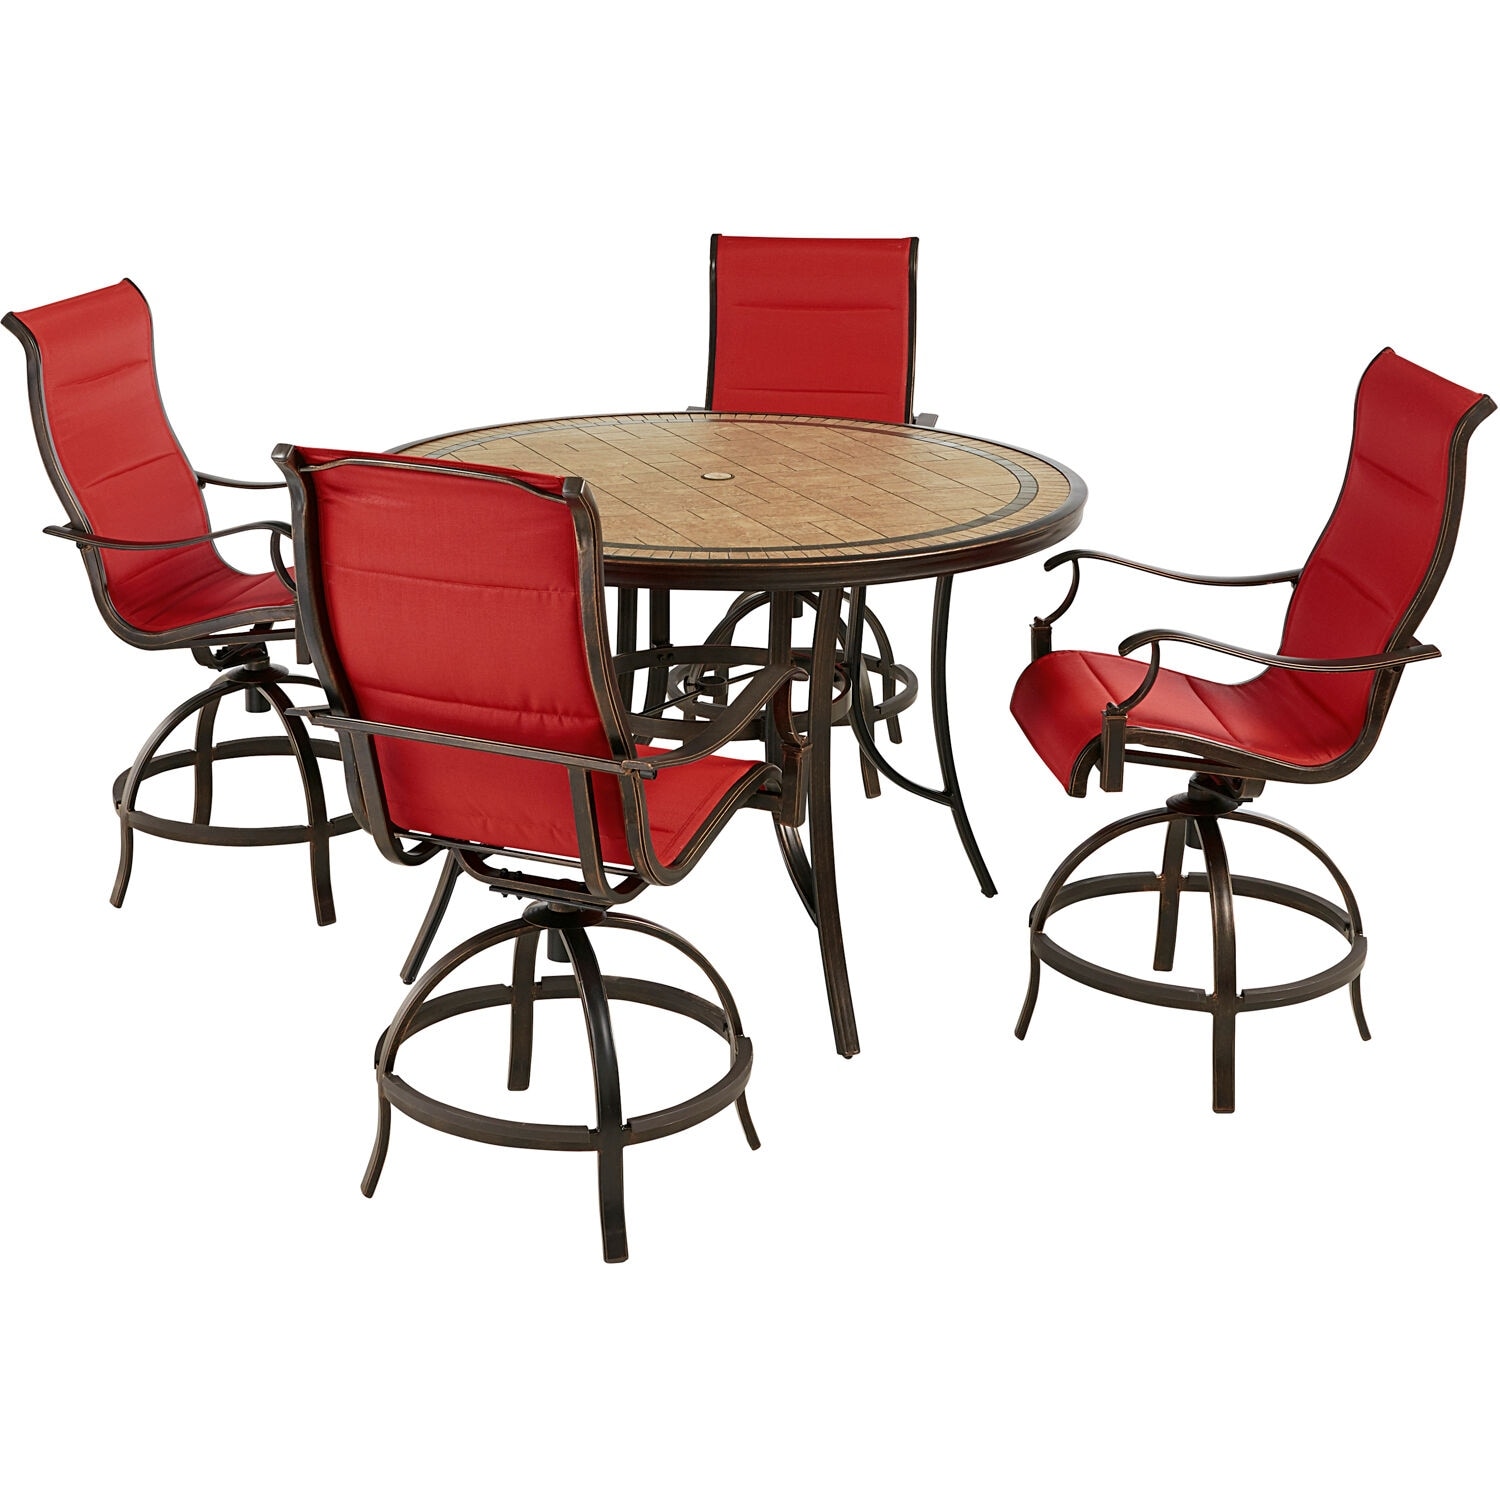 Hanover Monaco 5-piece High-dining Set In Sunset W/4 Padded Counter-height Swivel Chairs And A 56-in. Tile-top Table